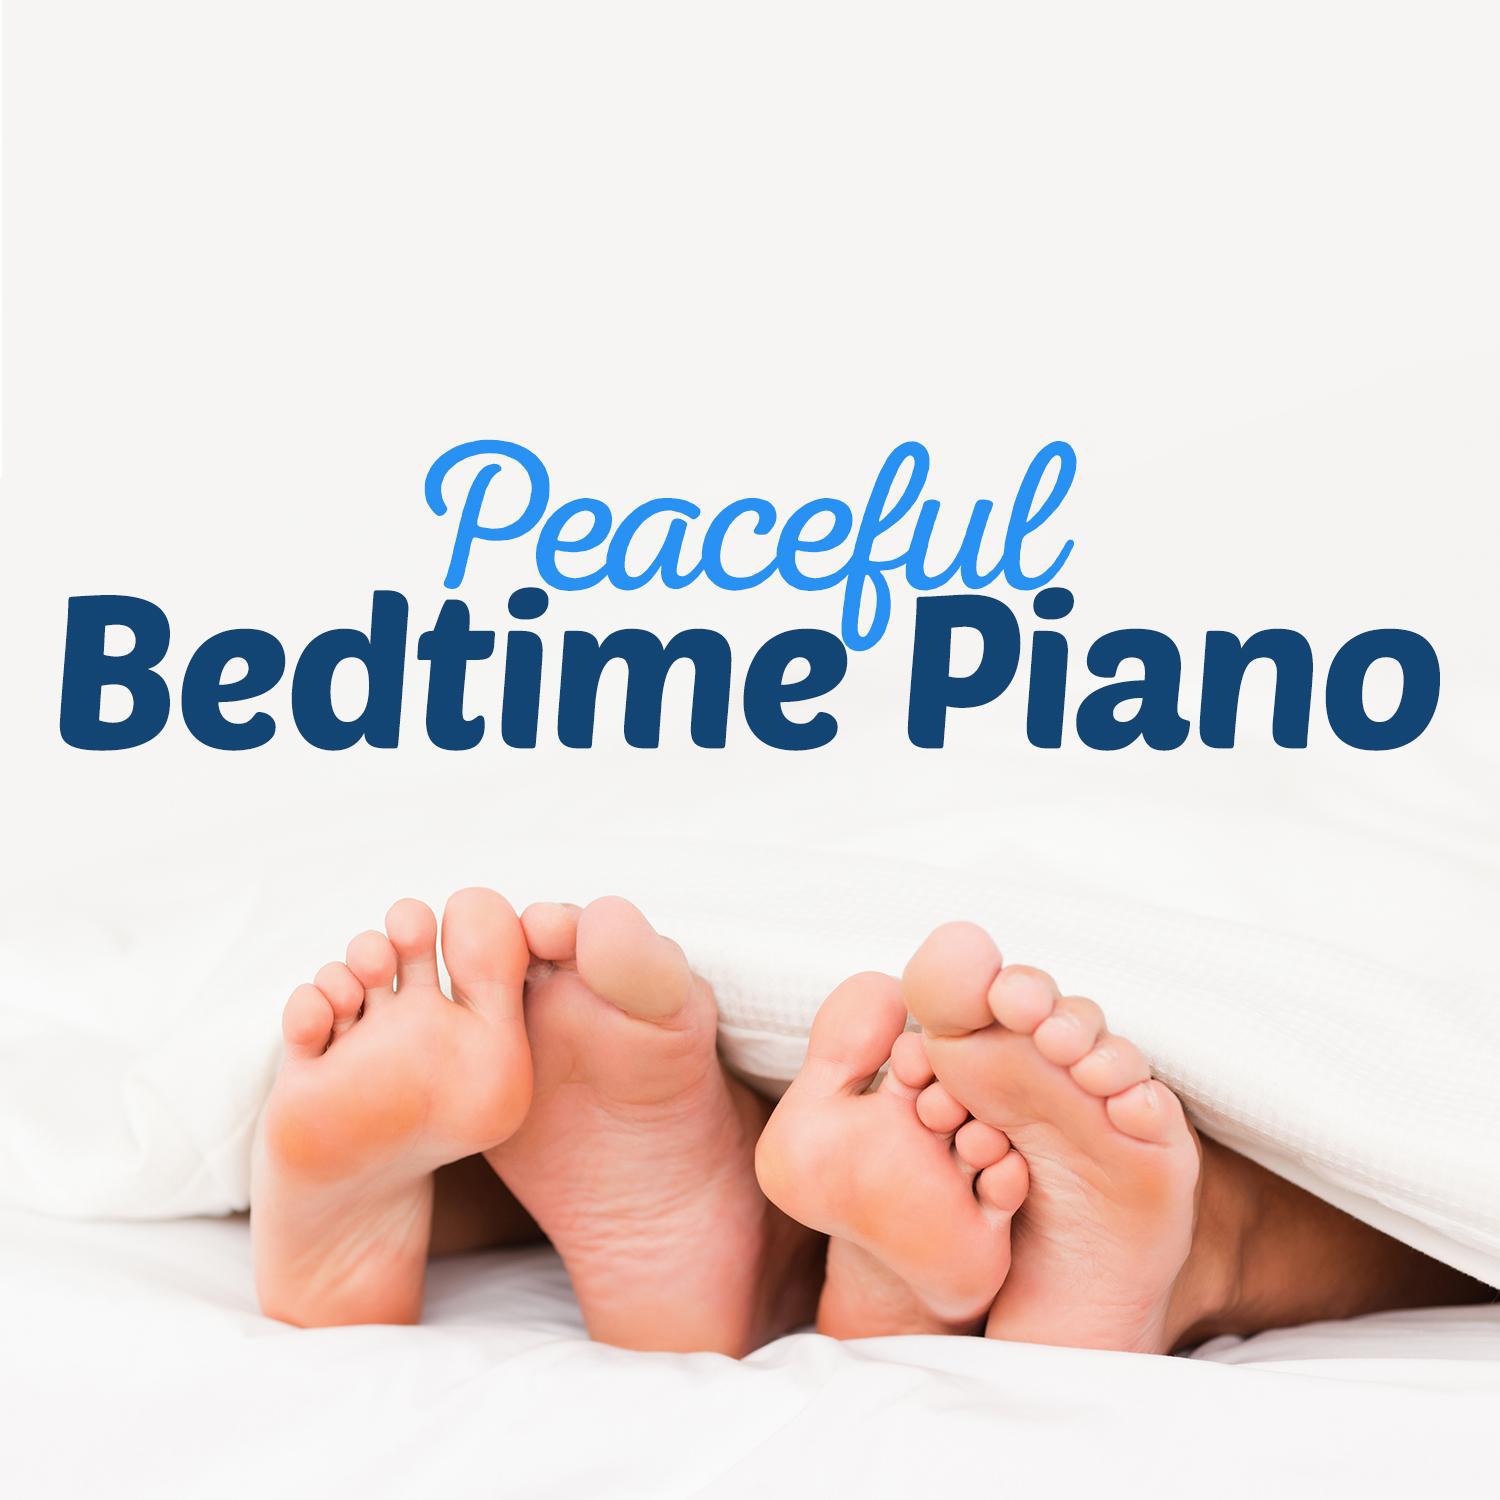 Peaceful Bedtime Piano